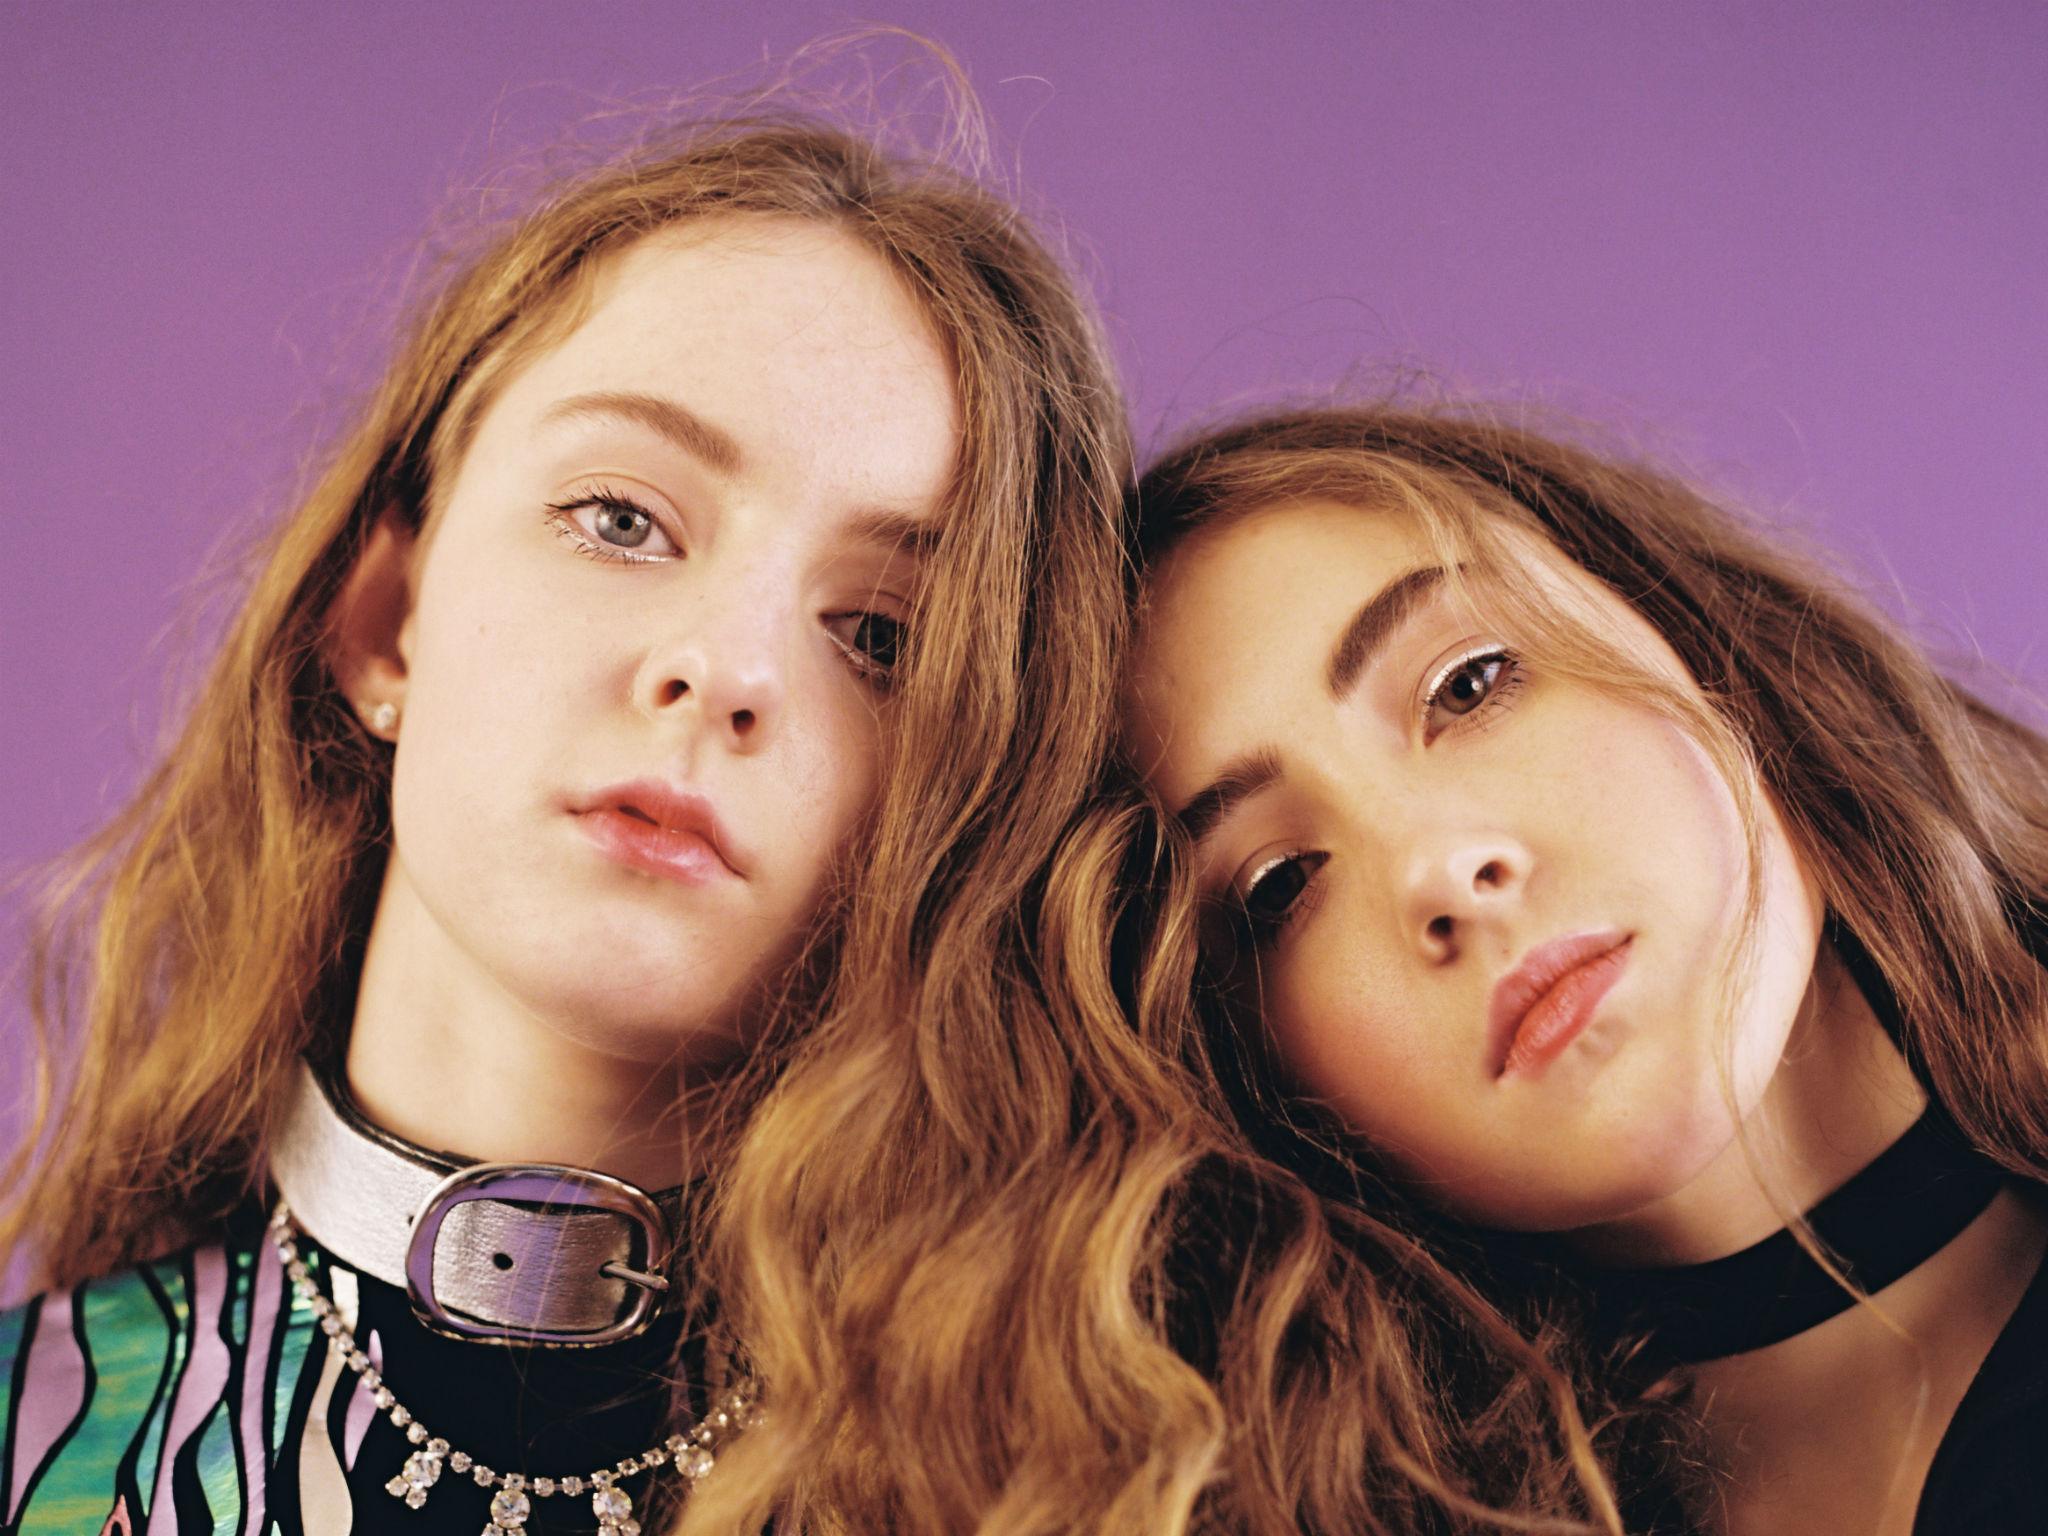 Let’s Eat Grandma, whose album ‘I, Gemini,’ Andy Gill thinks should be nominated for the Mercury Prize